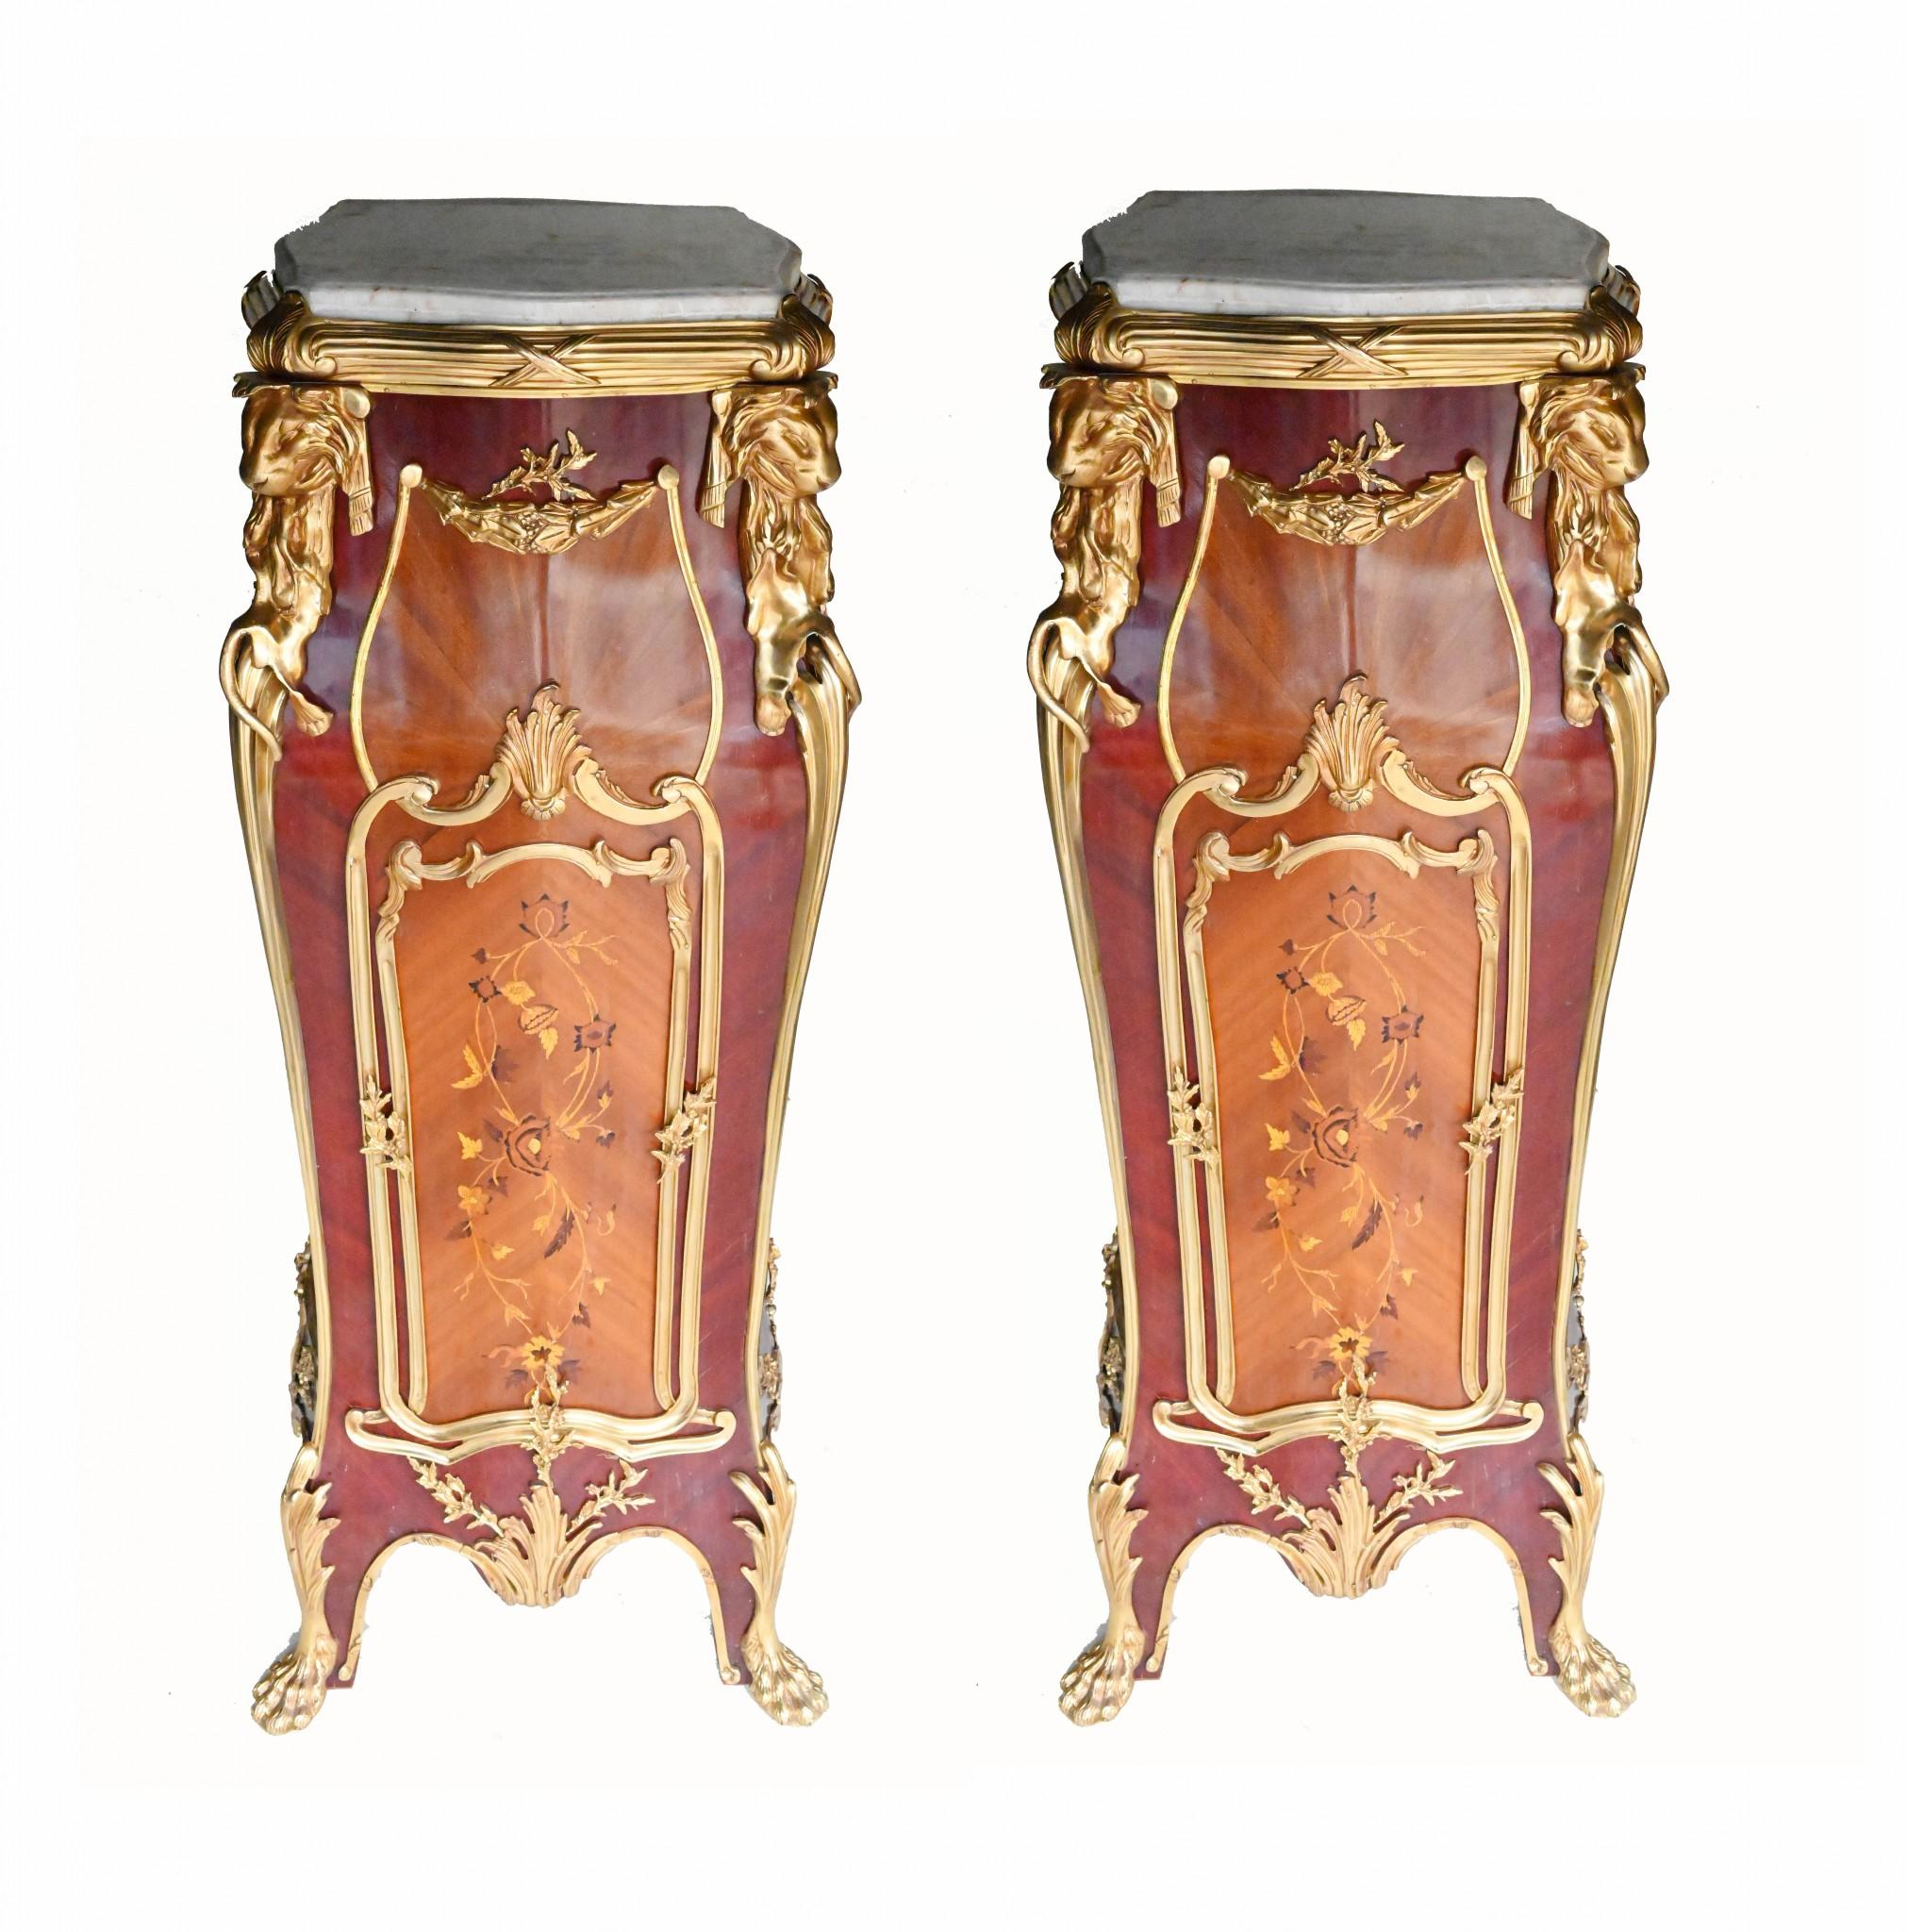 Elegant pair of French pedestal stands after Francois Linke
These really are the ultimate for a high end interior
Crafted from kingwood with intricate inlay work including floral motifs
Linke (1855) was a famous French ebiniste and cabinet maker